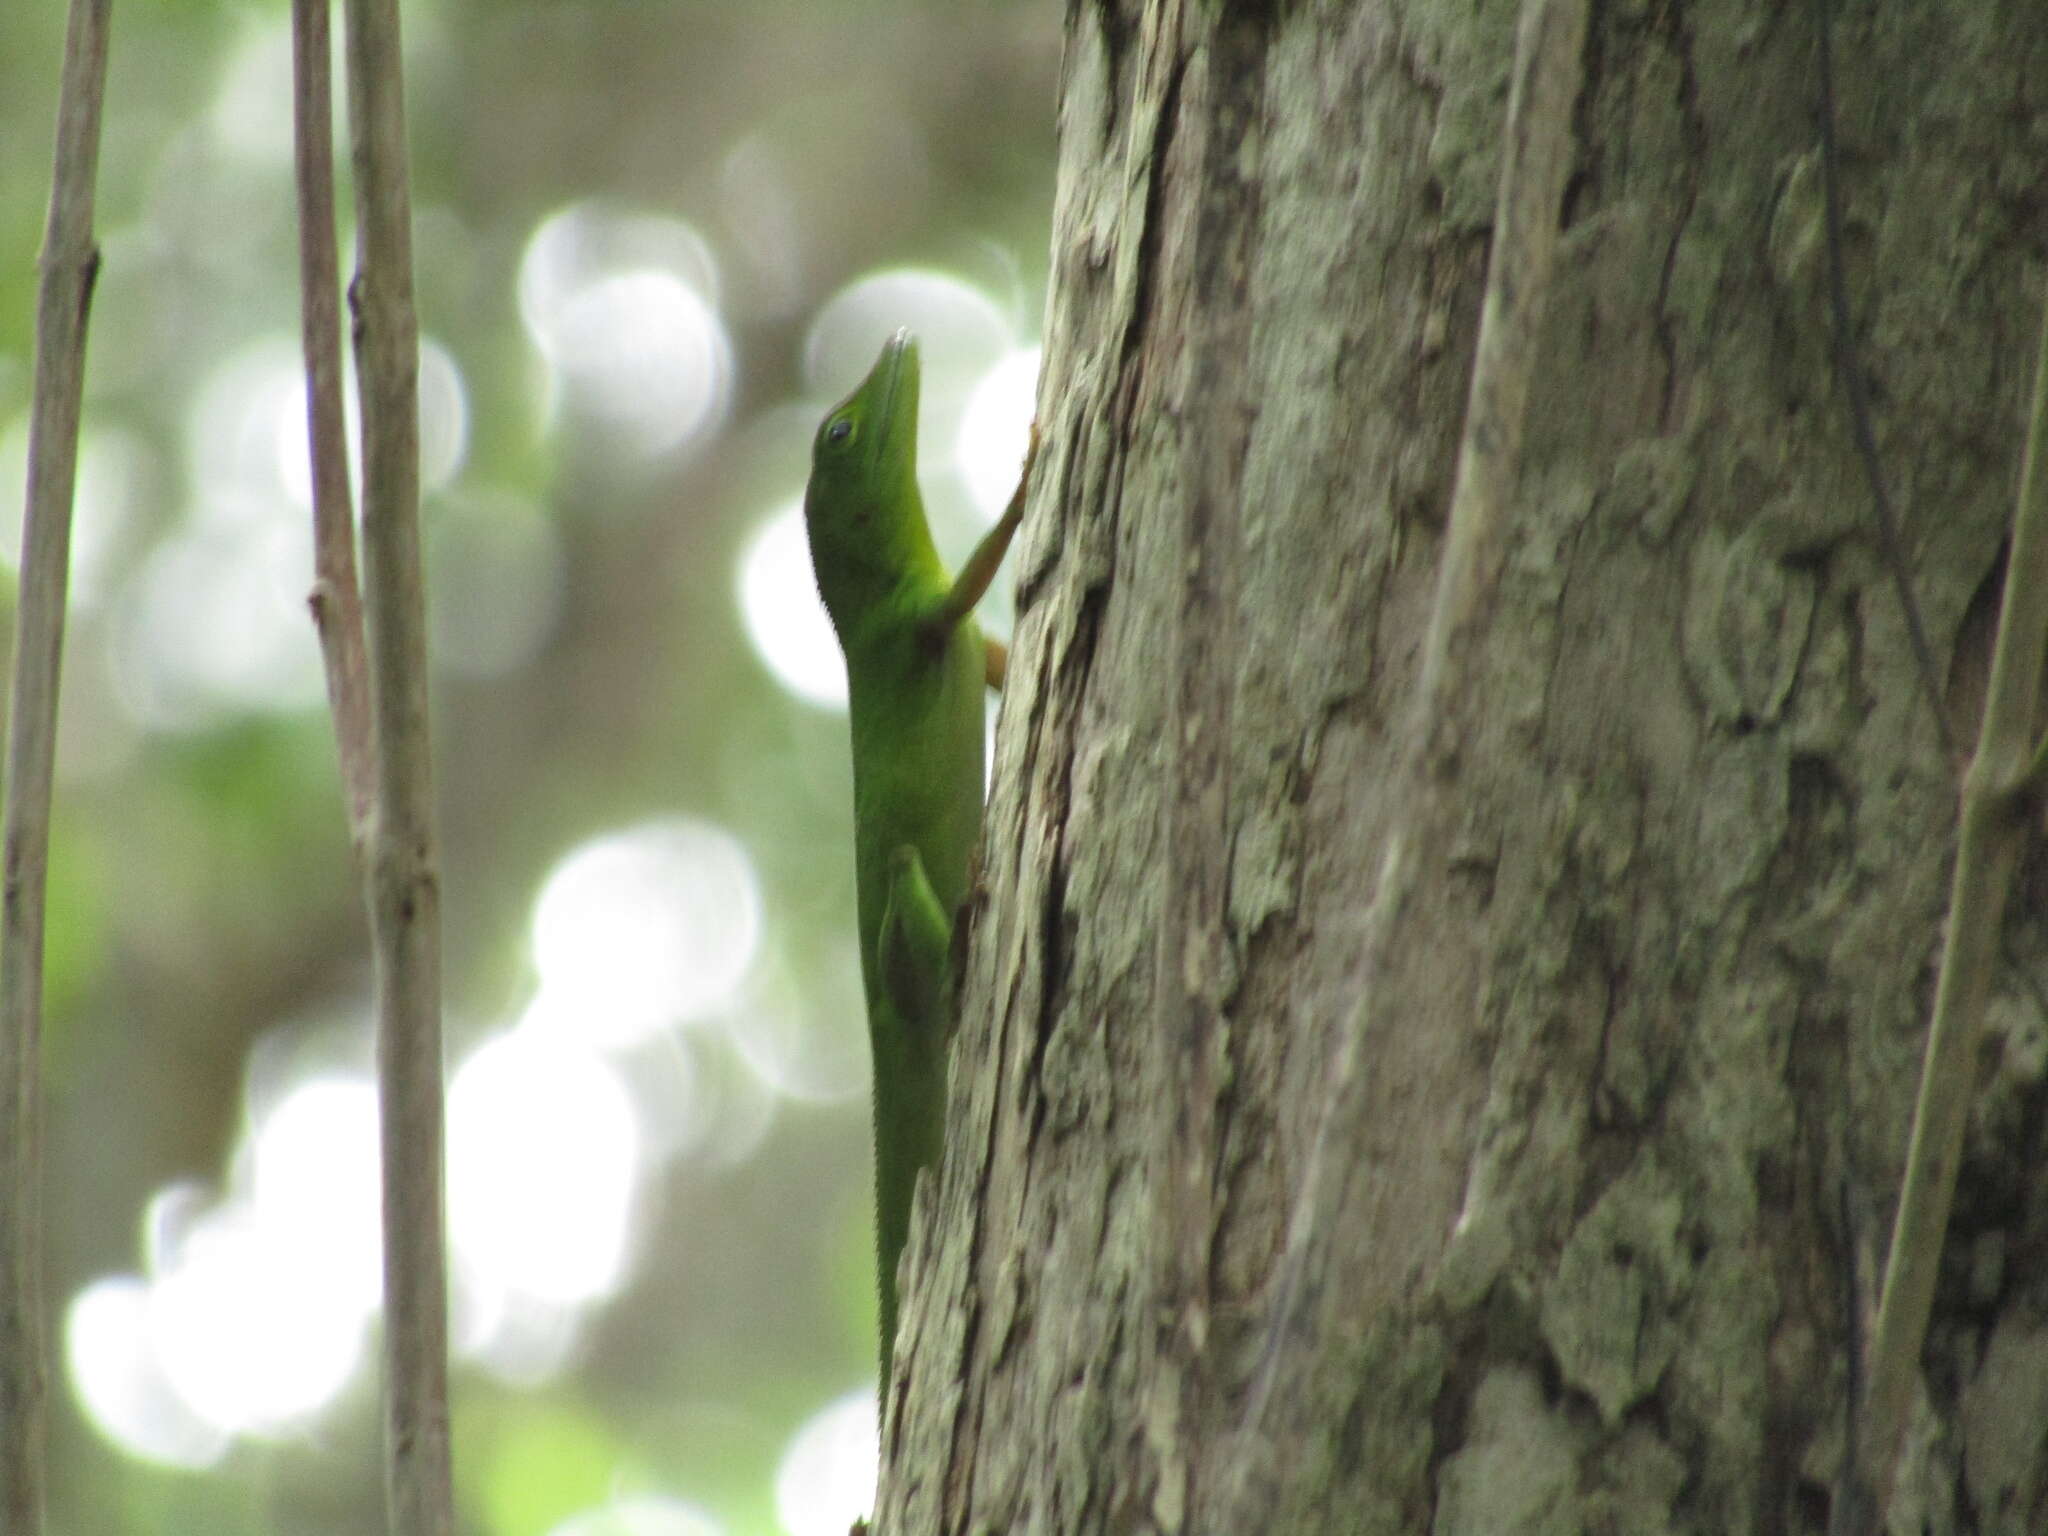 Image of Jamaican giant anole